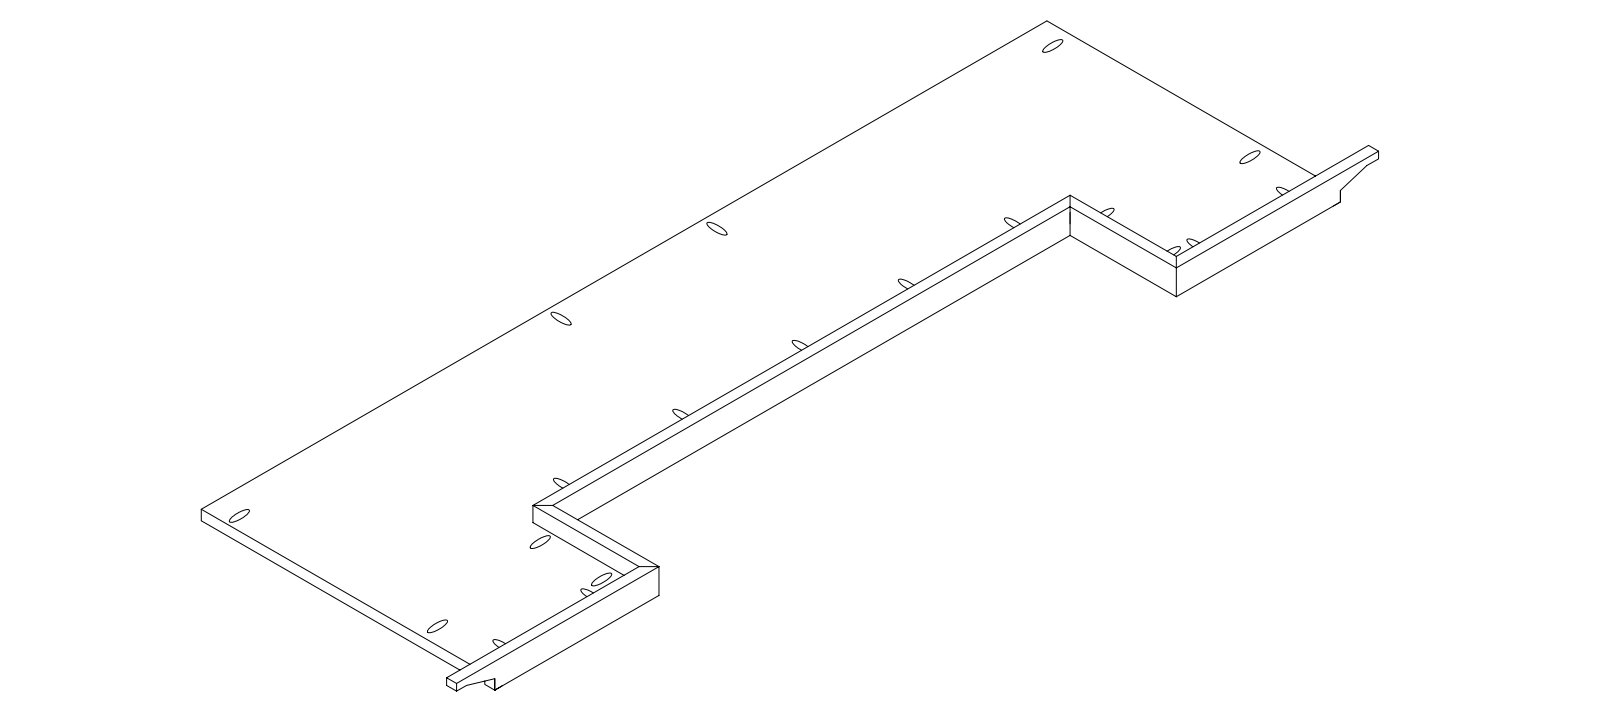 Assembly Drawing - Attach Rear Trim to the Top